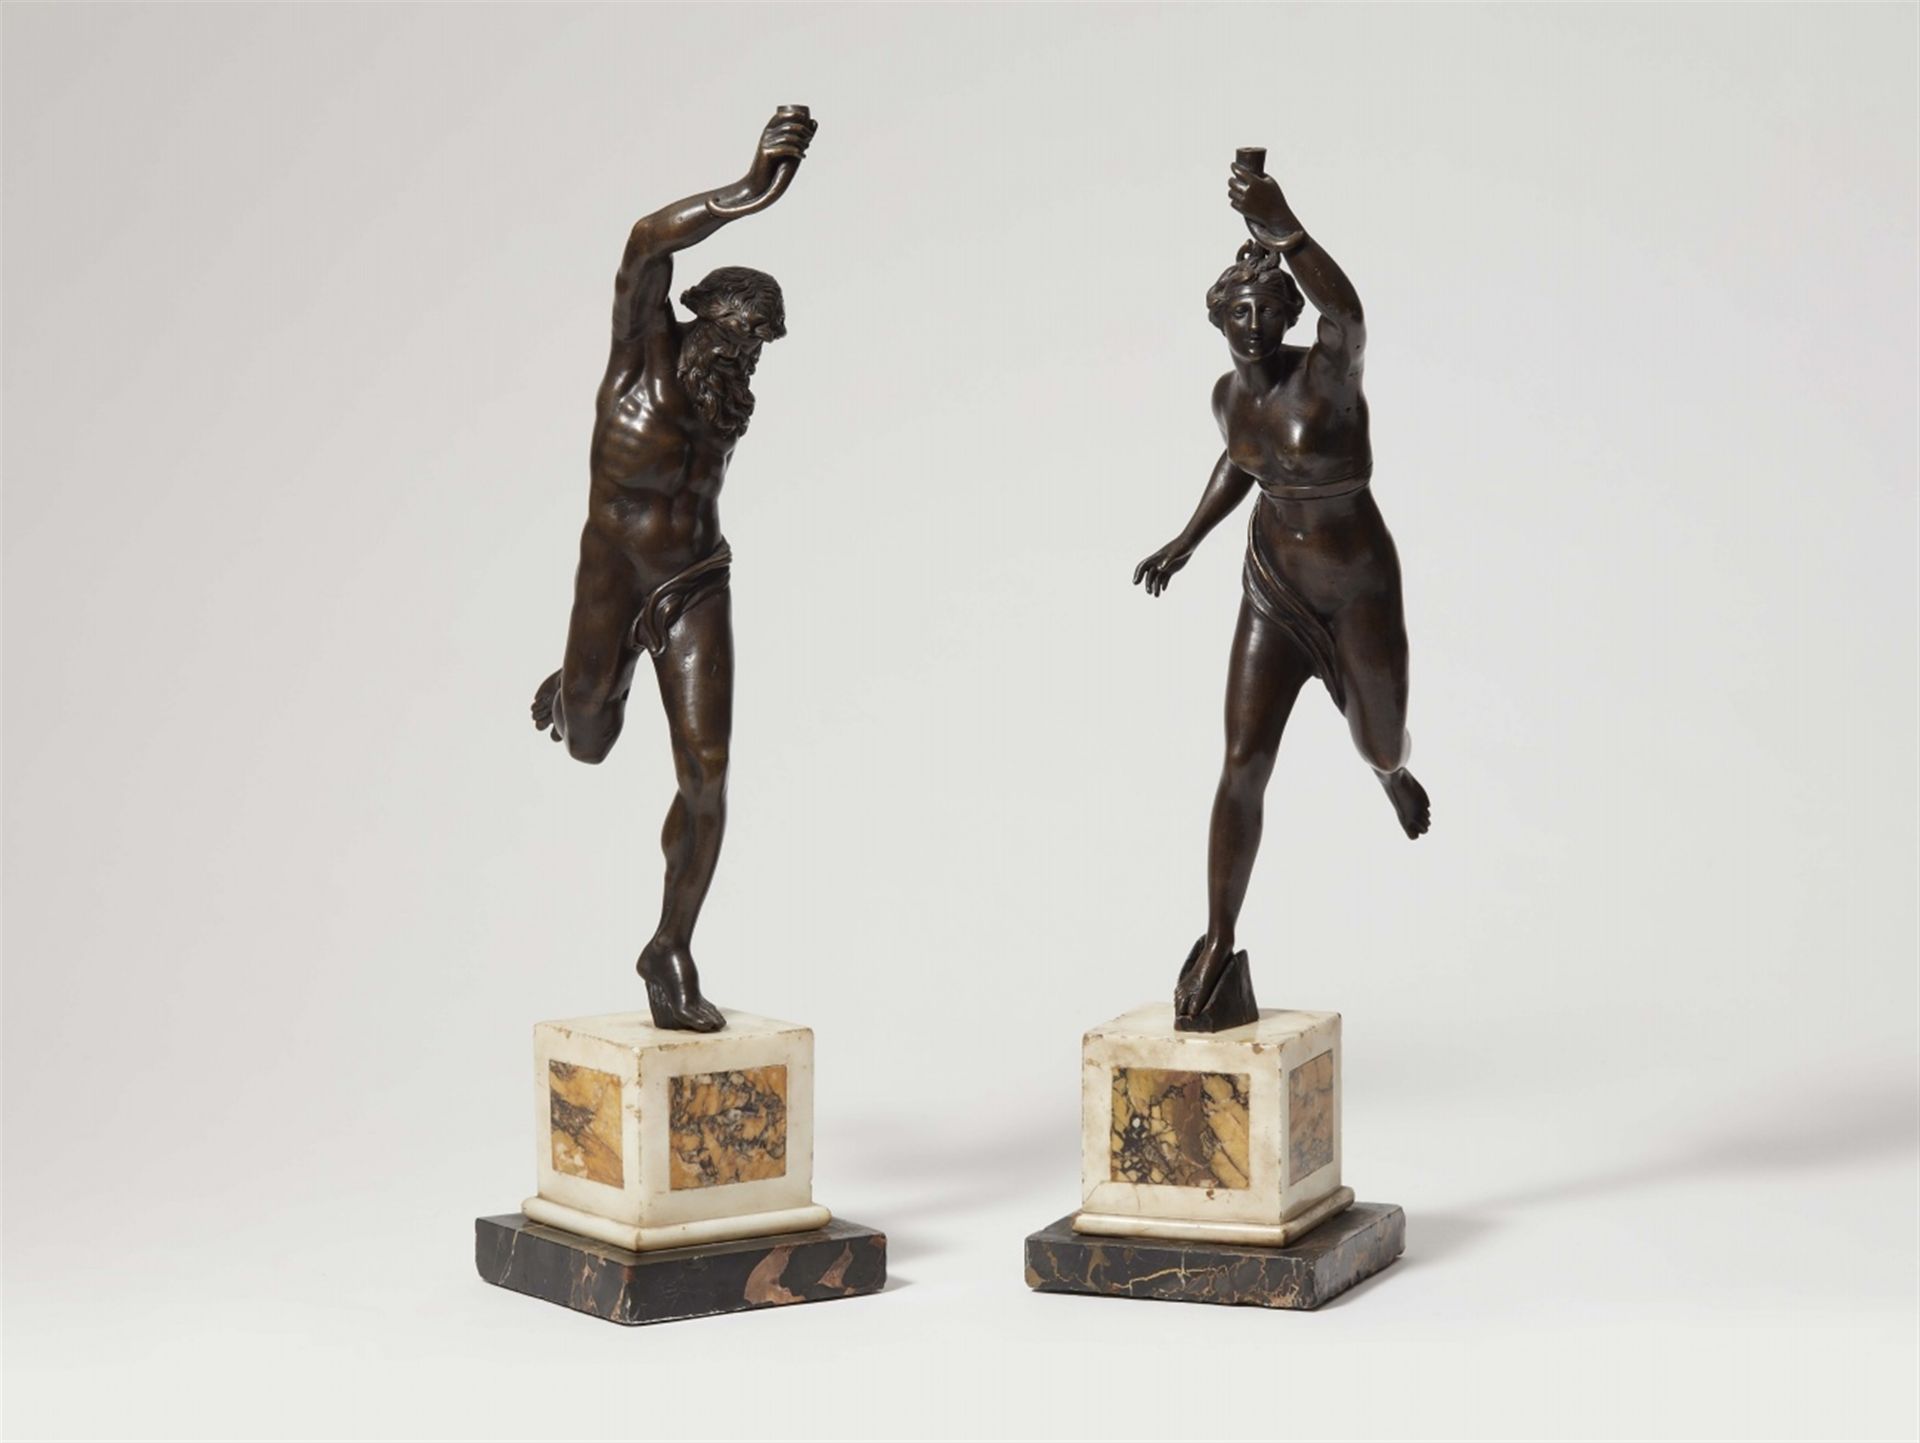 A bronze model of a satyr and a nymph